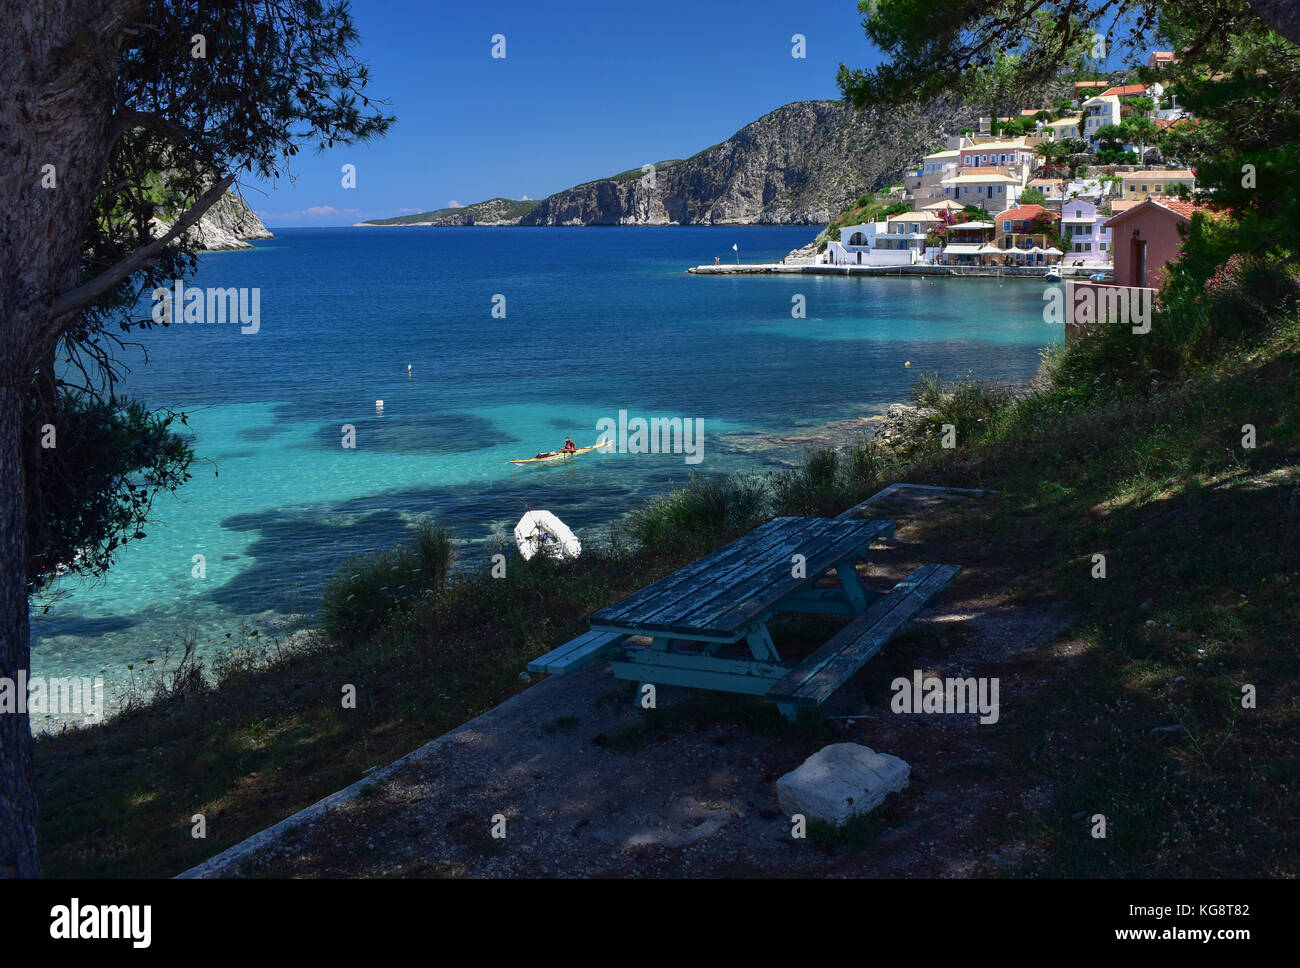 A picnic bench in the shade overlooking the bay at Asos, Cephalonia, Greece. Stock Photo